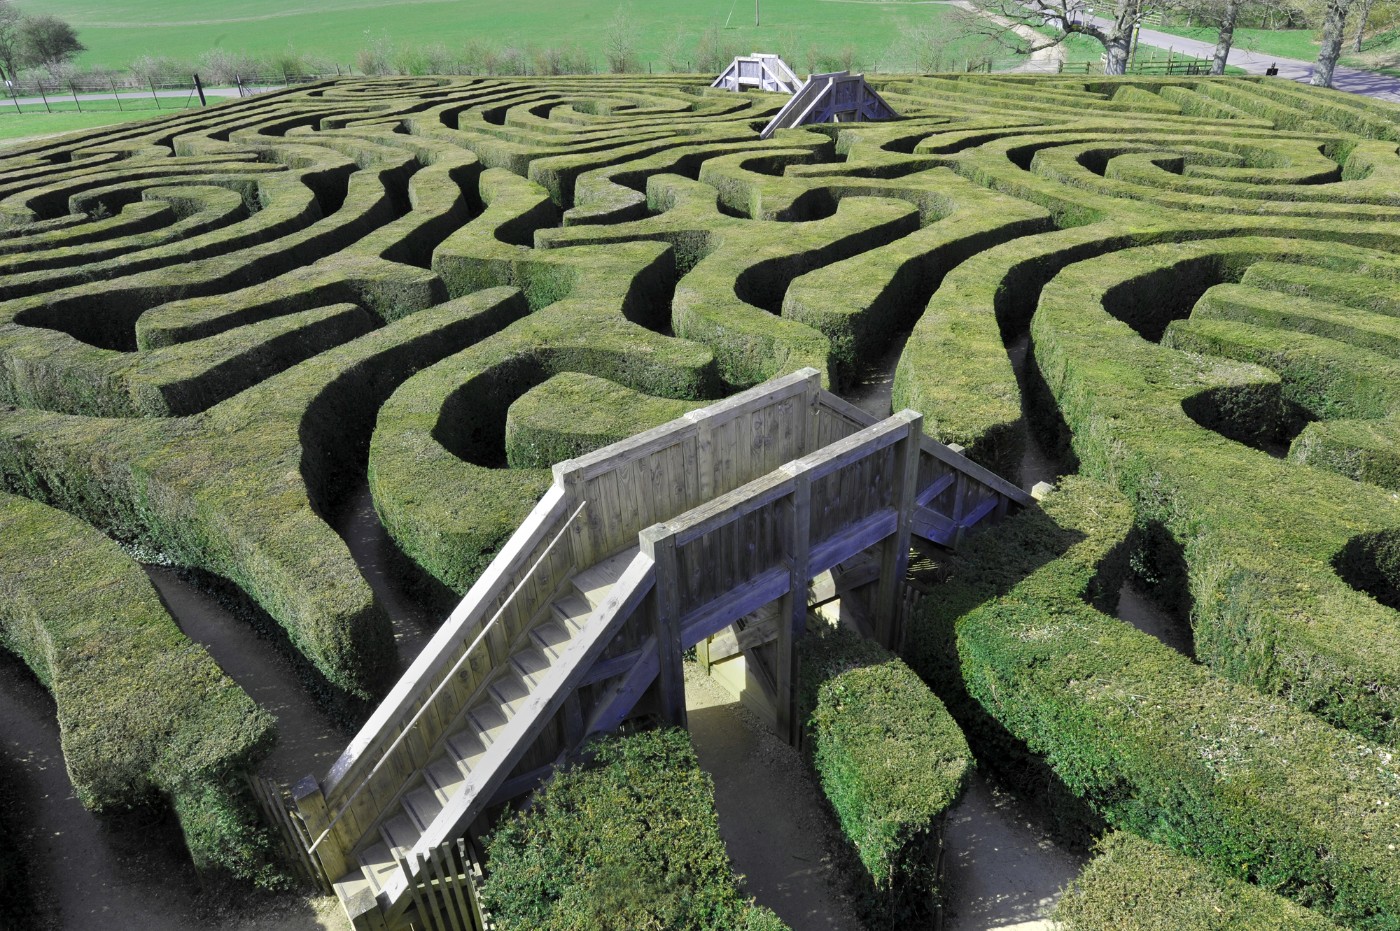 https://tickertapecdn.tdameritrade.com/assets/images/pages/md/Hedge maze: investors can stay the course